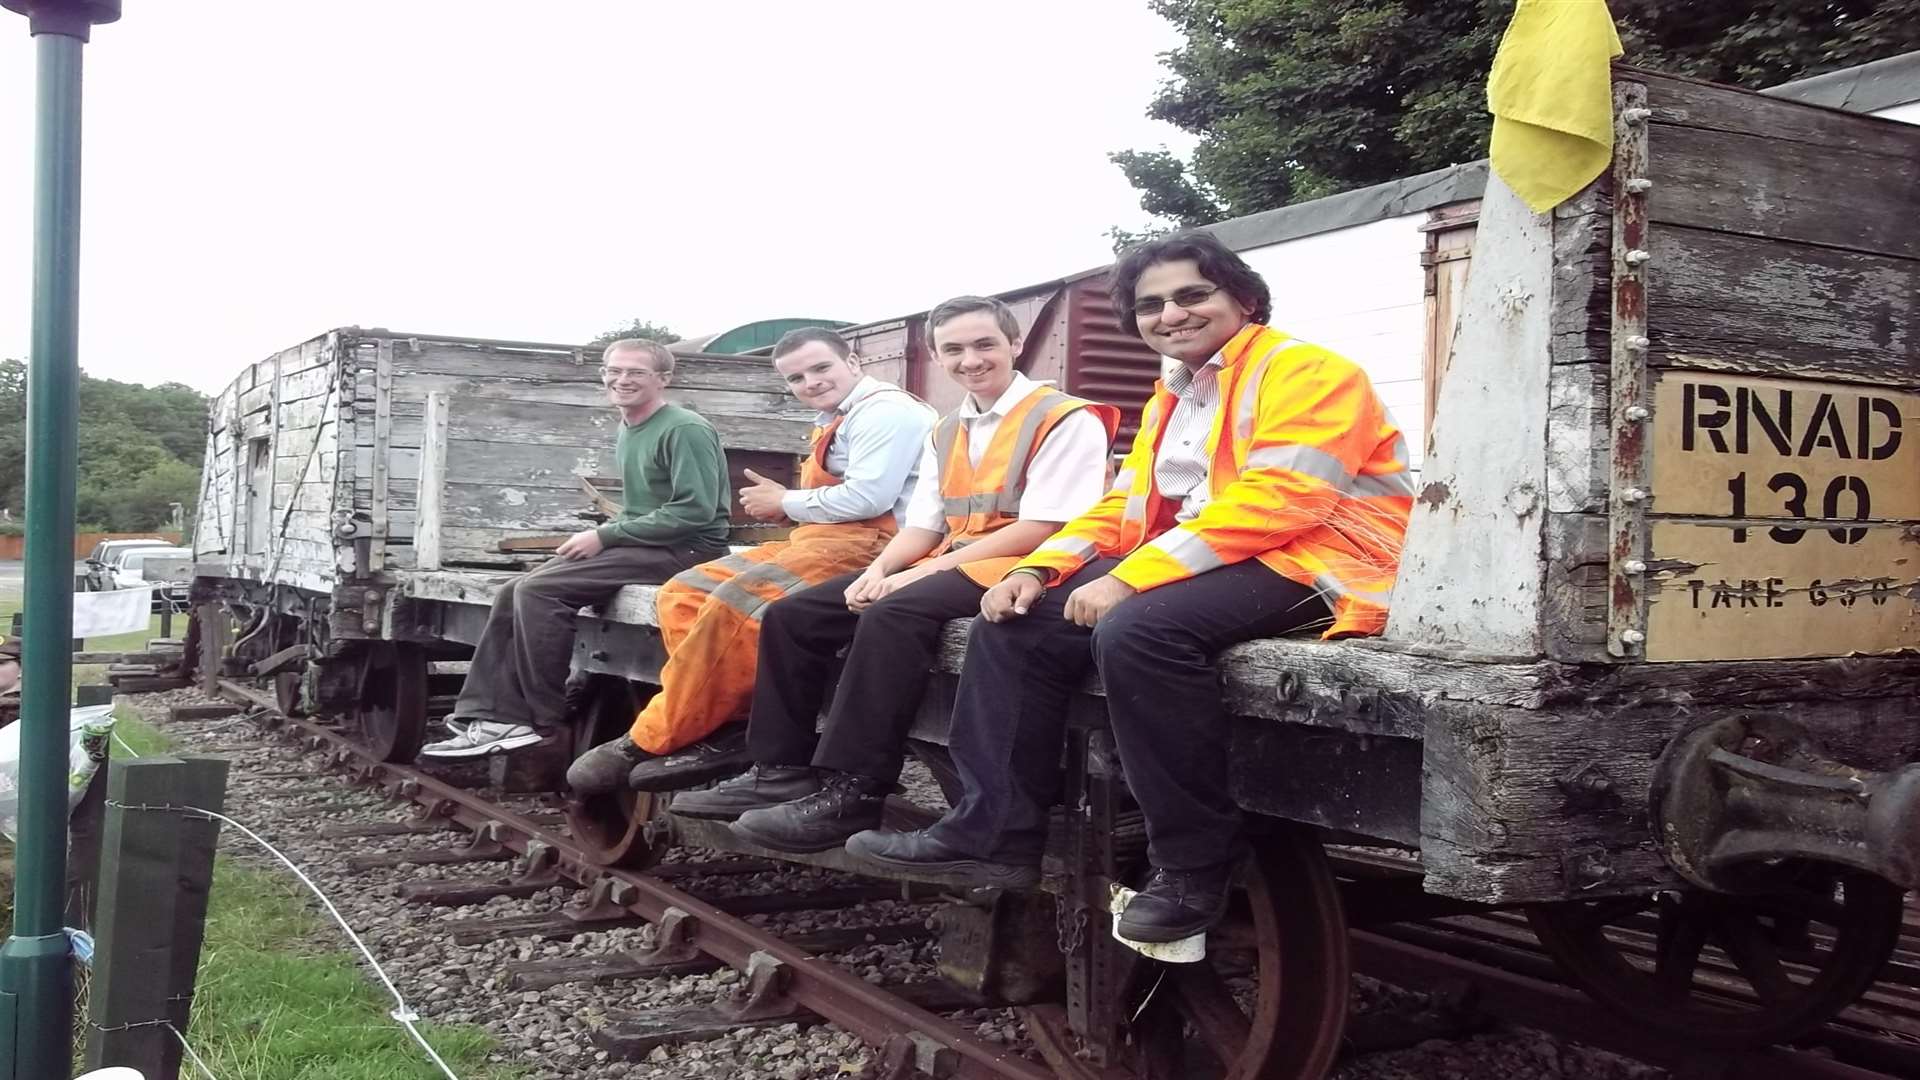 Volunteers and apprentices at East Kent Railway which is hopeful of getting a £50,000 grant from the People's Millions to bring steam back and improve their rail apprenticeship scheme